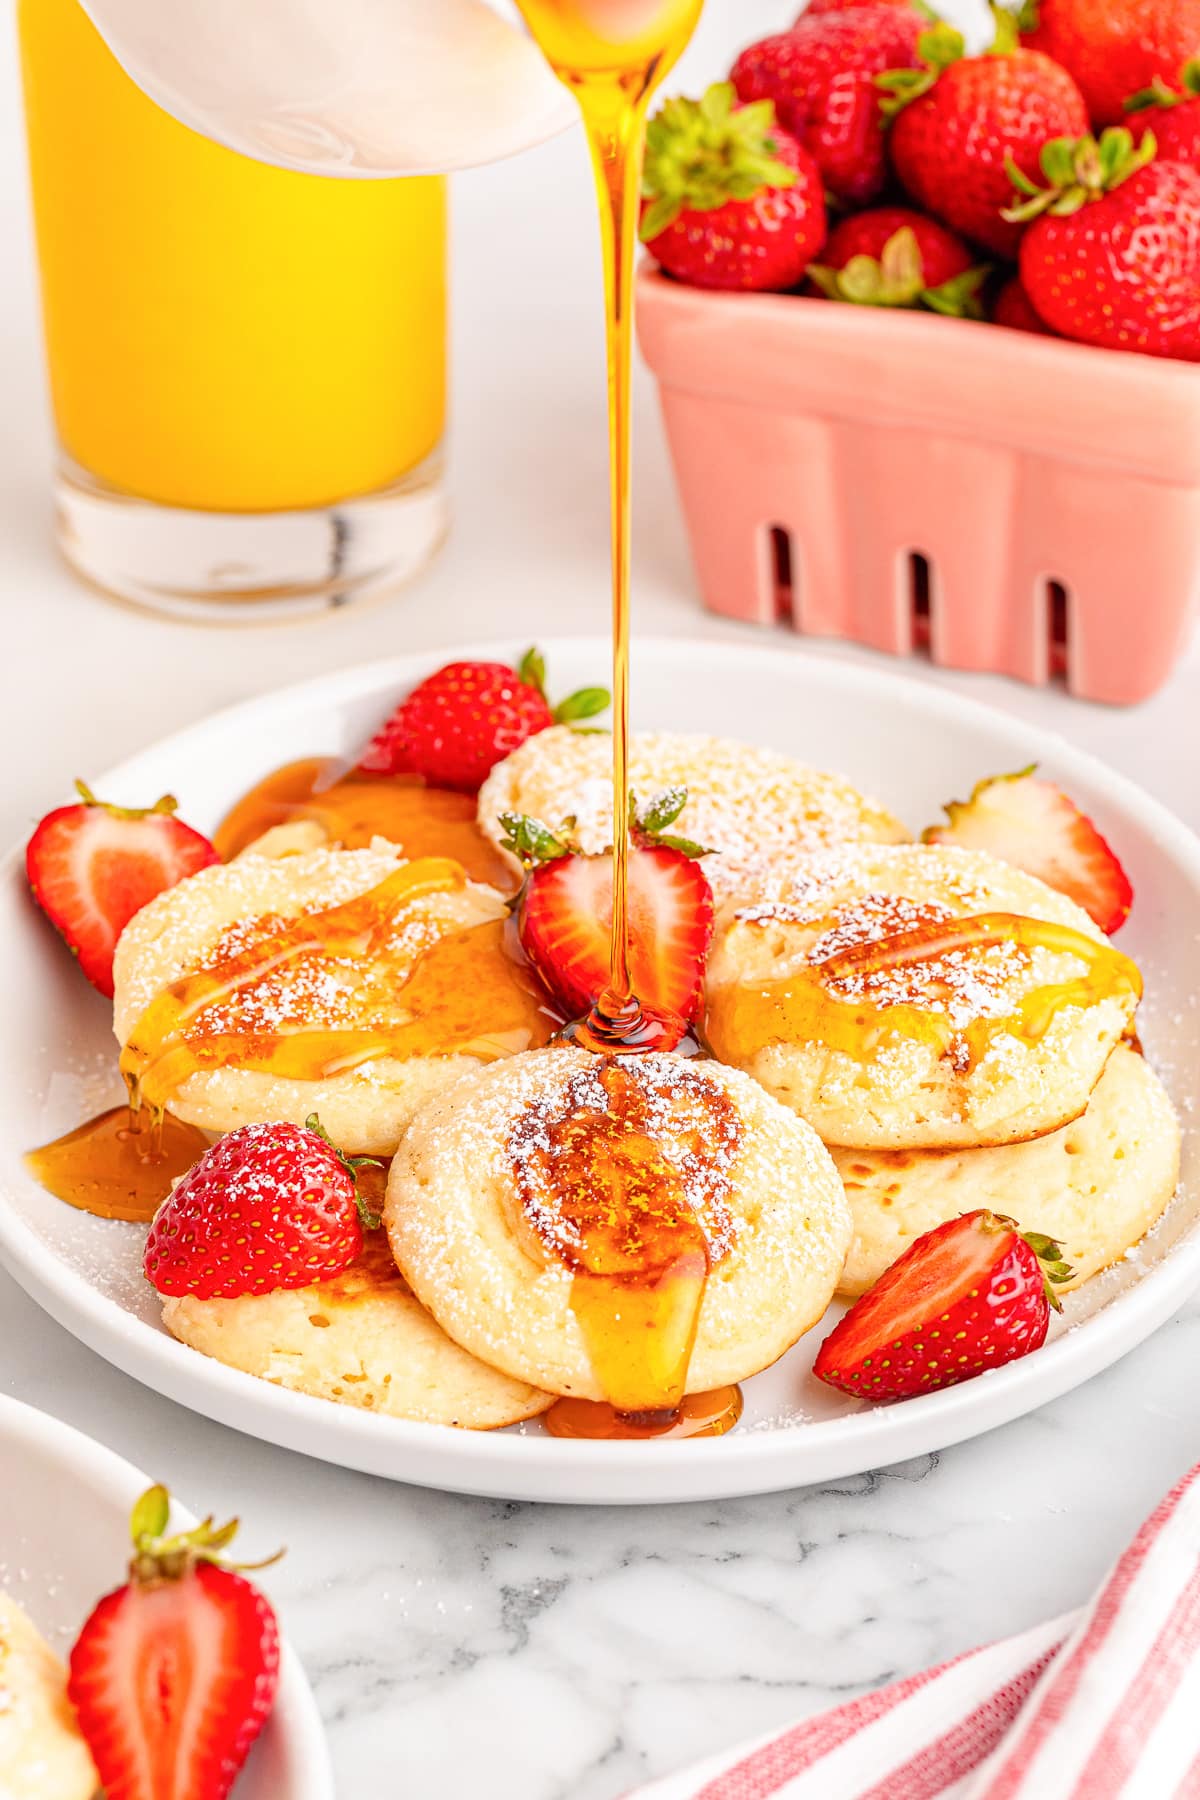 A plate of silver dollar pancakes topped with fresh strawberries with maple syrup being poured over them.